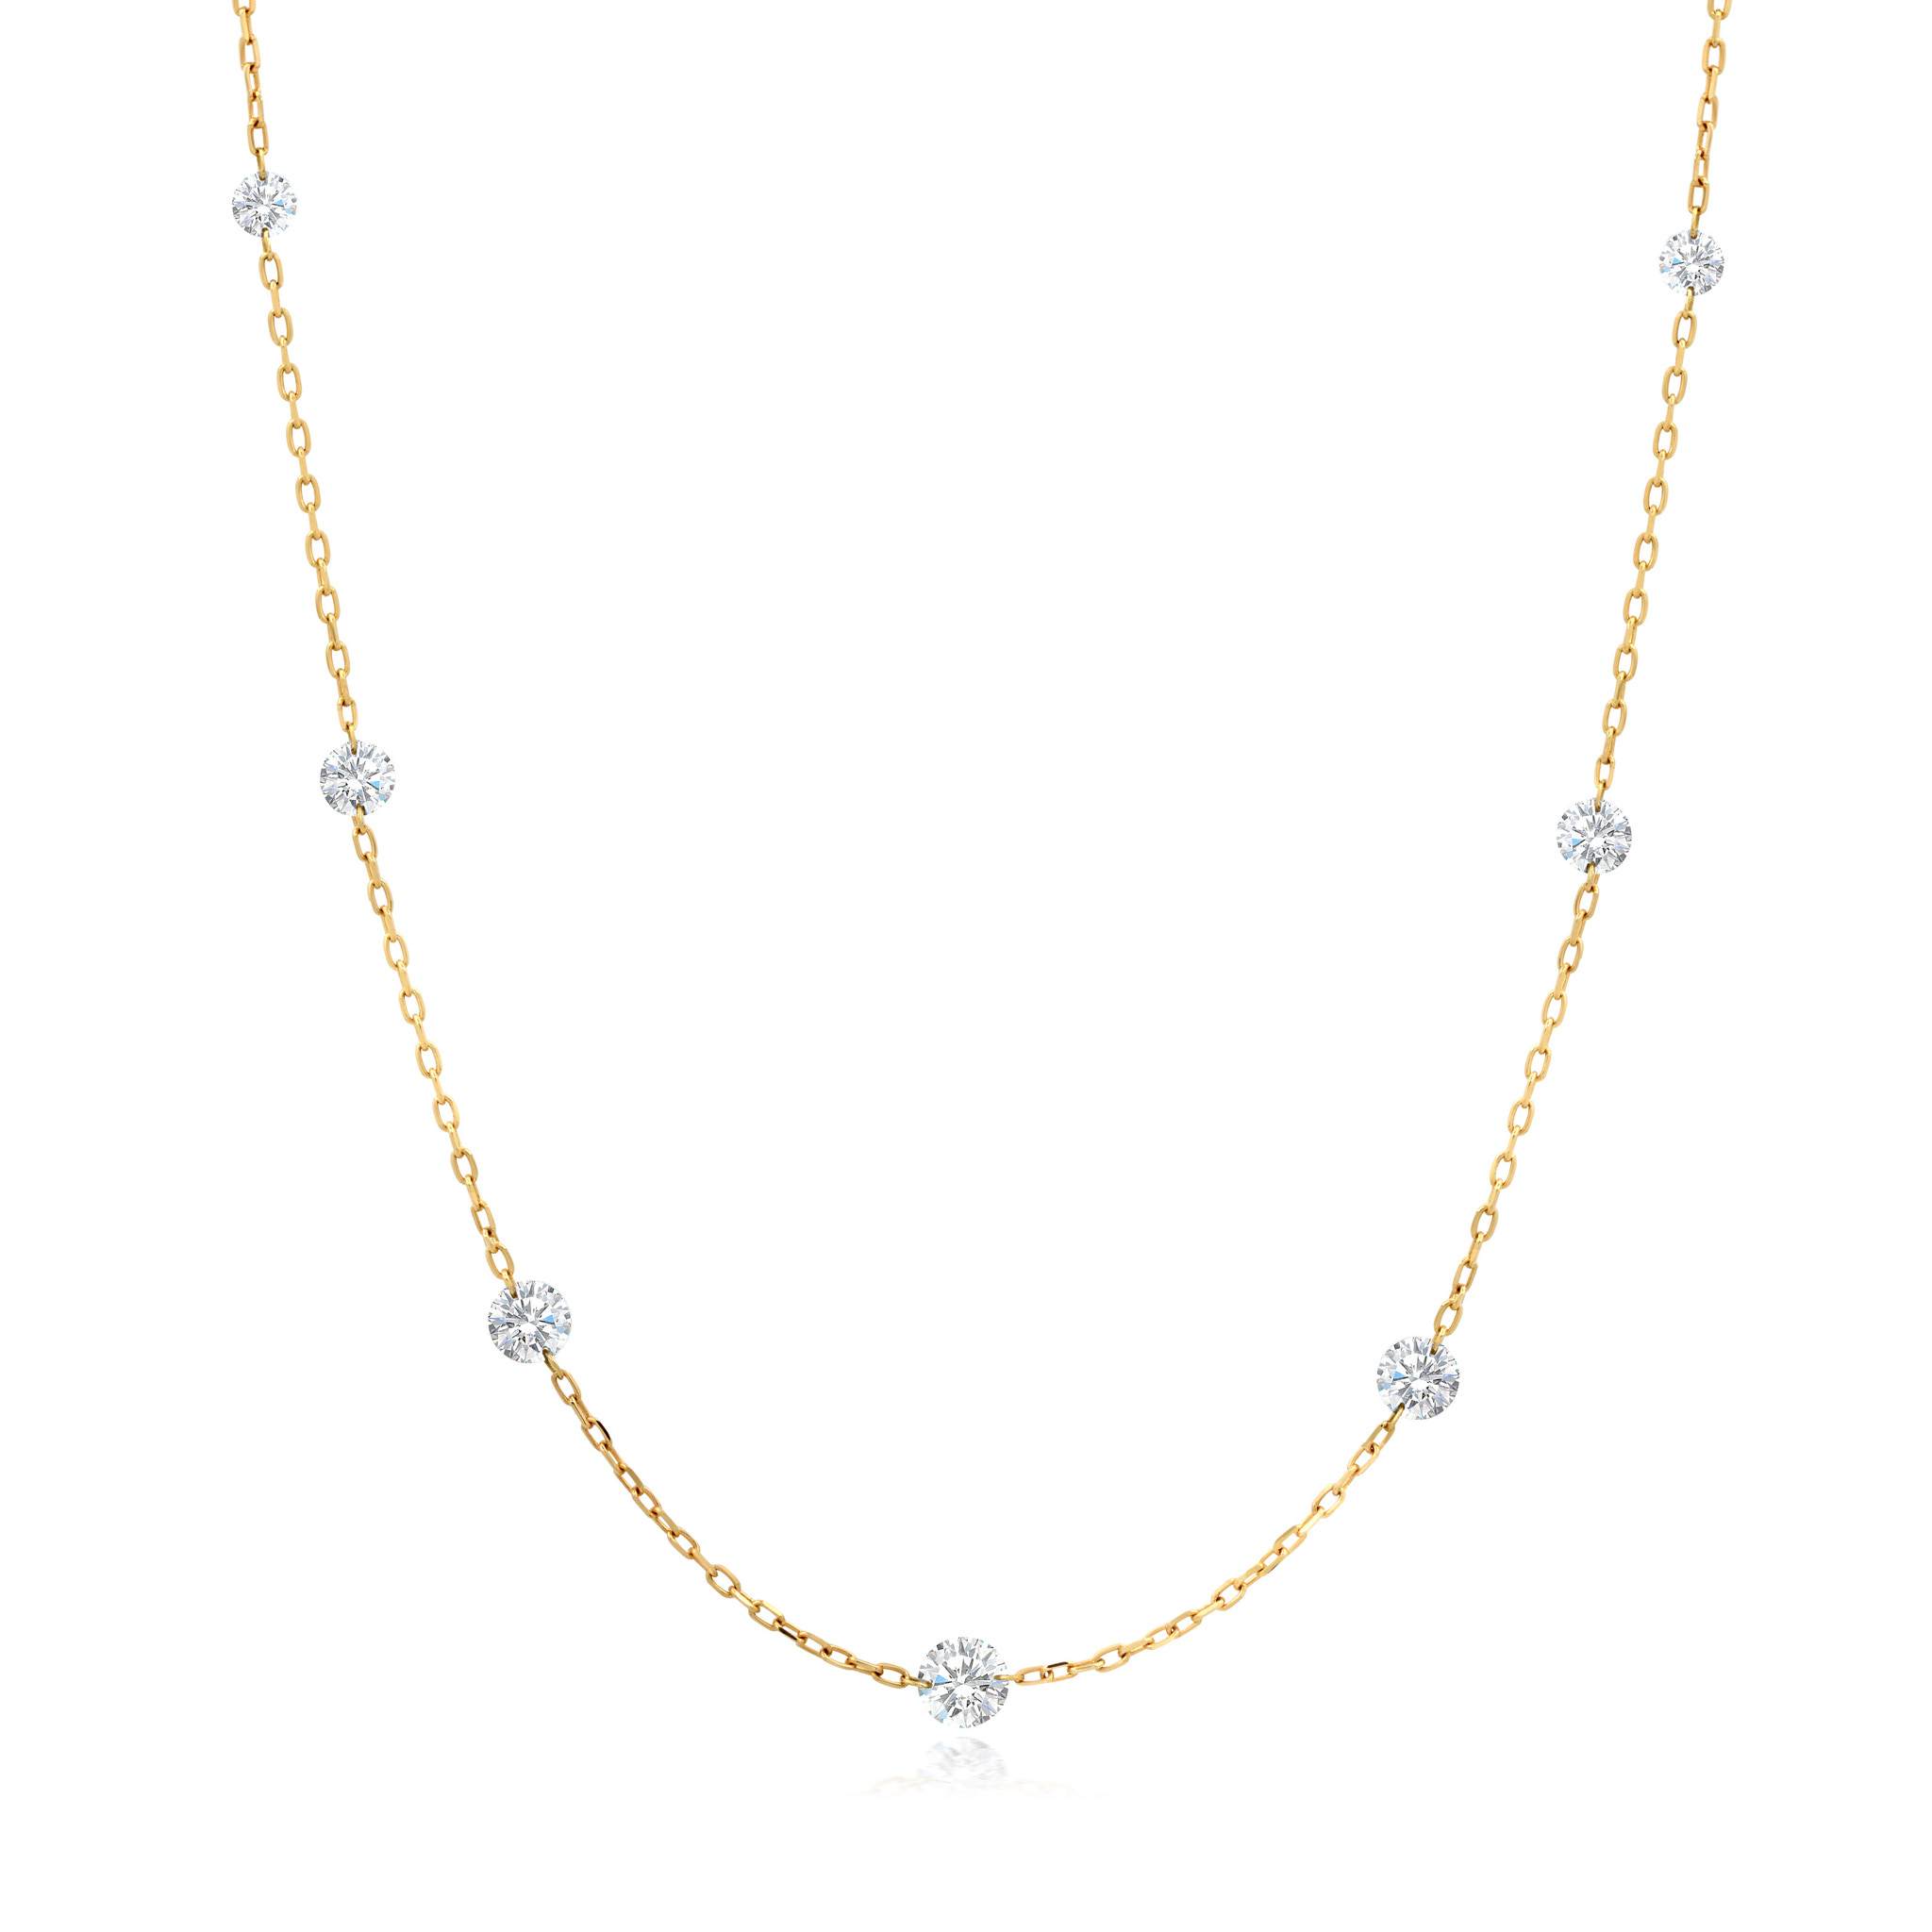 Graziela Gems - Necklace - 1/2 Ct Floating Diamond Station Necklace - Yellow Gold